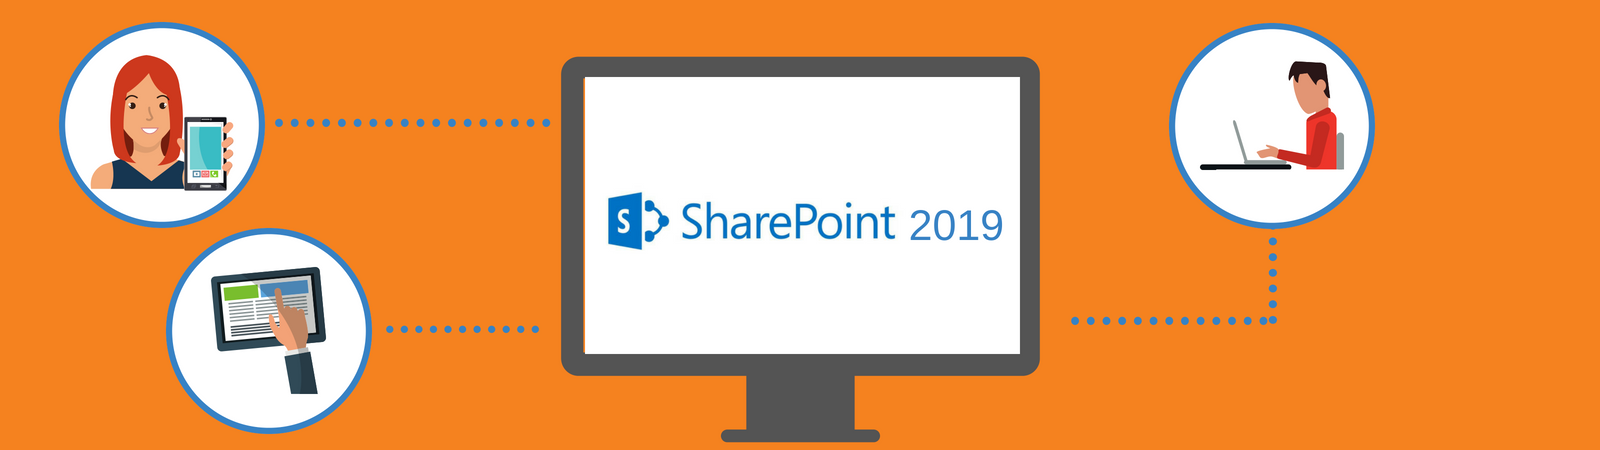 Top 5 highlights of Microsoft SharePoint 2019